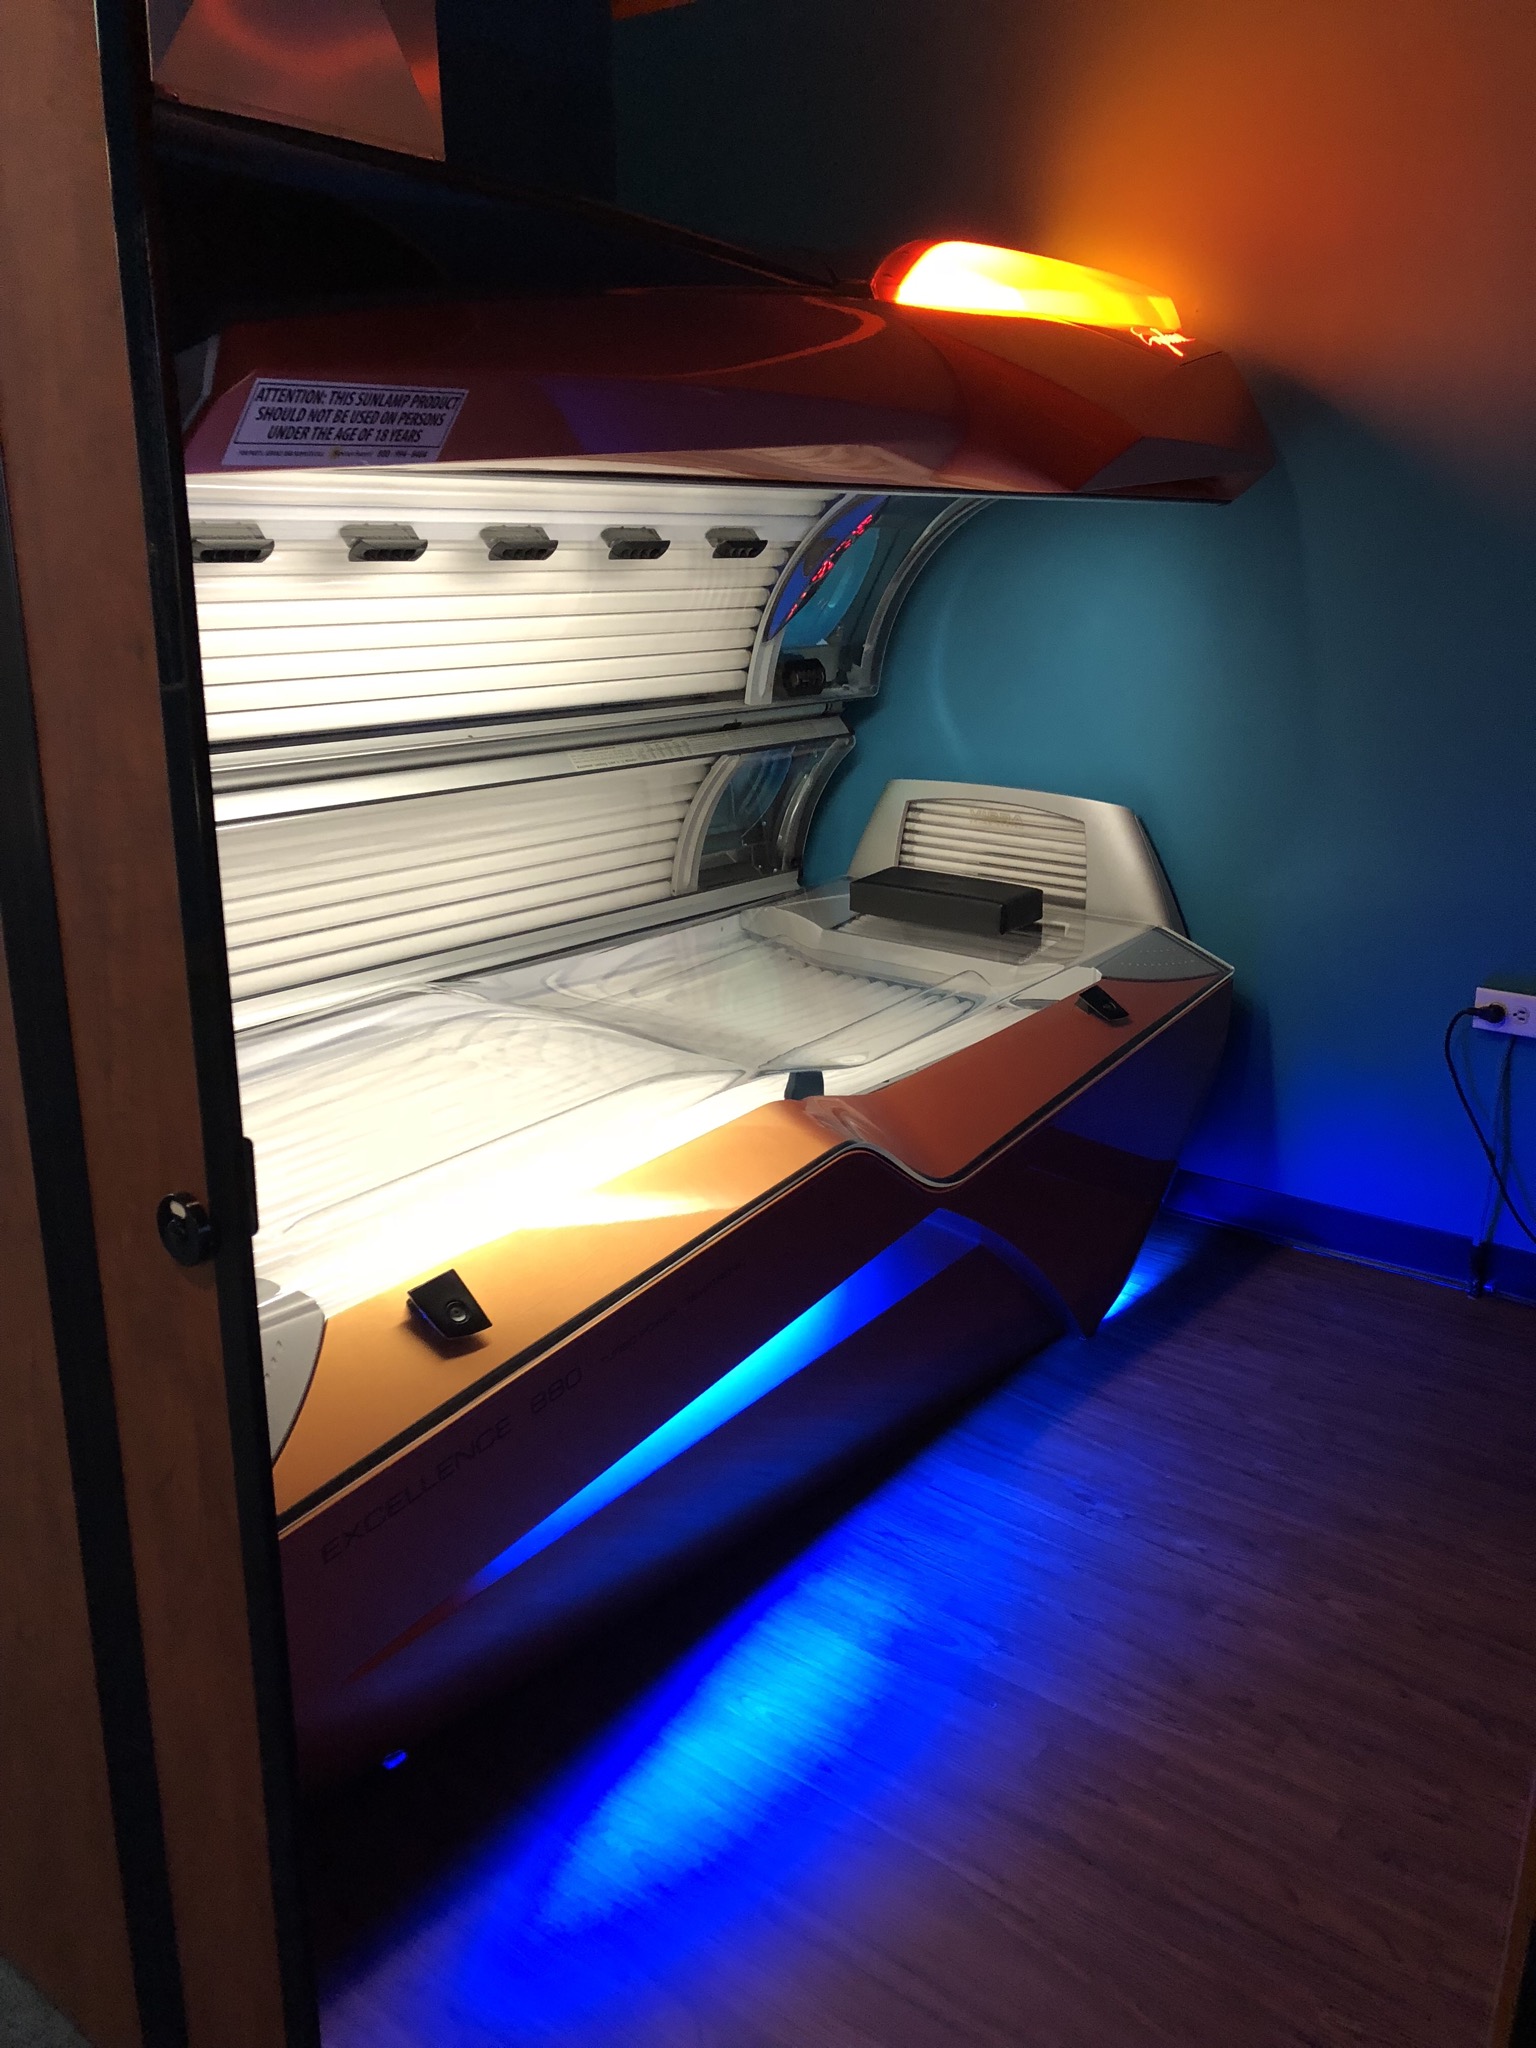  Excellence 880. Level 5 - Tanning bed - 12 minute max.